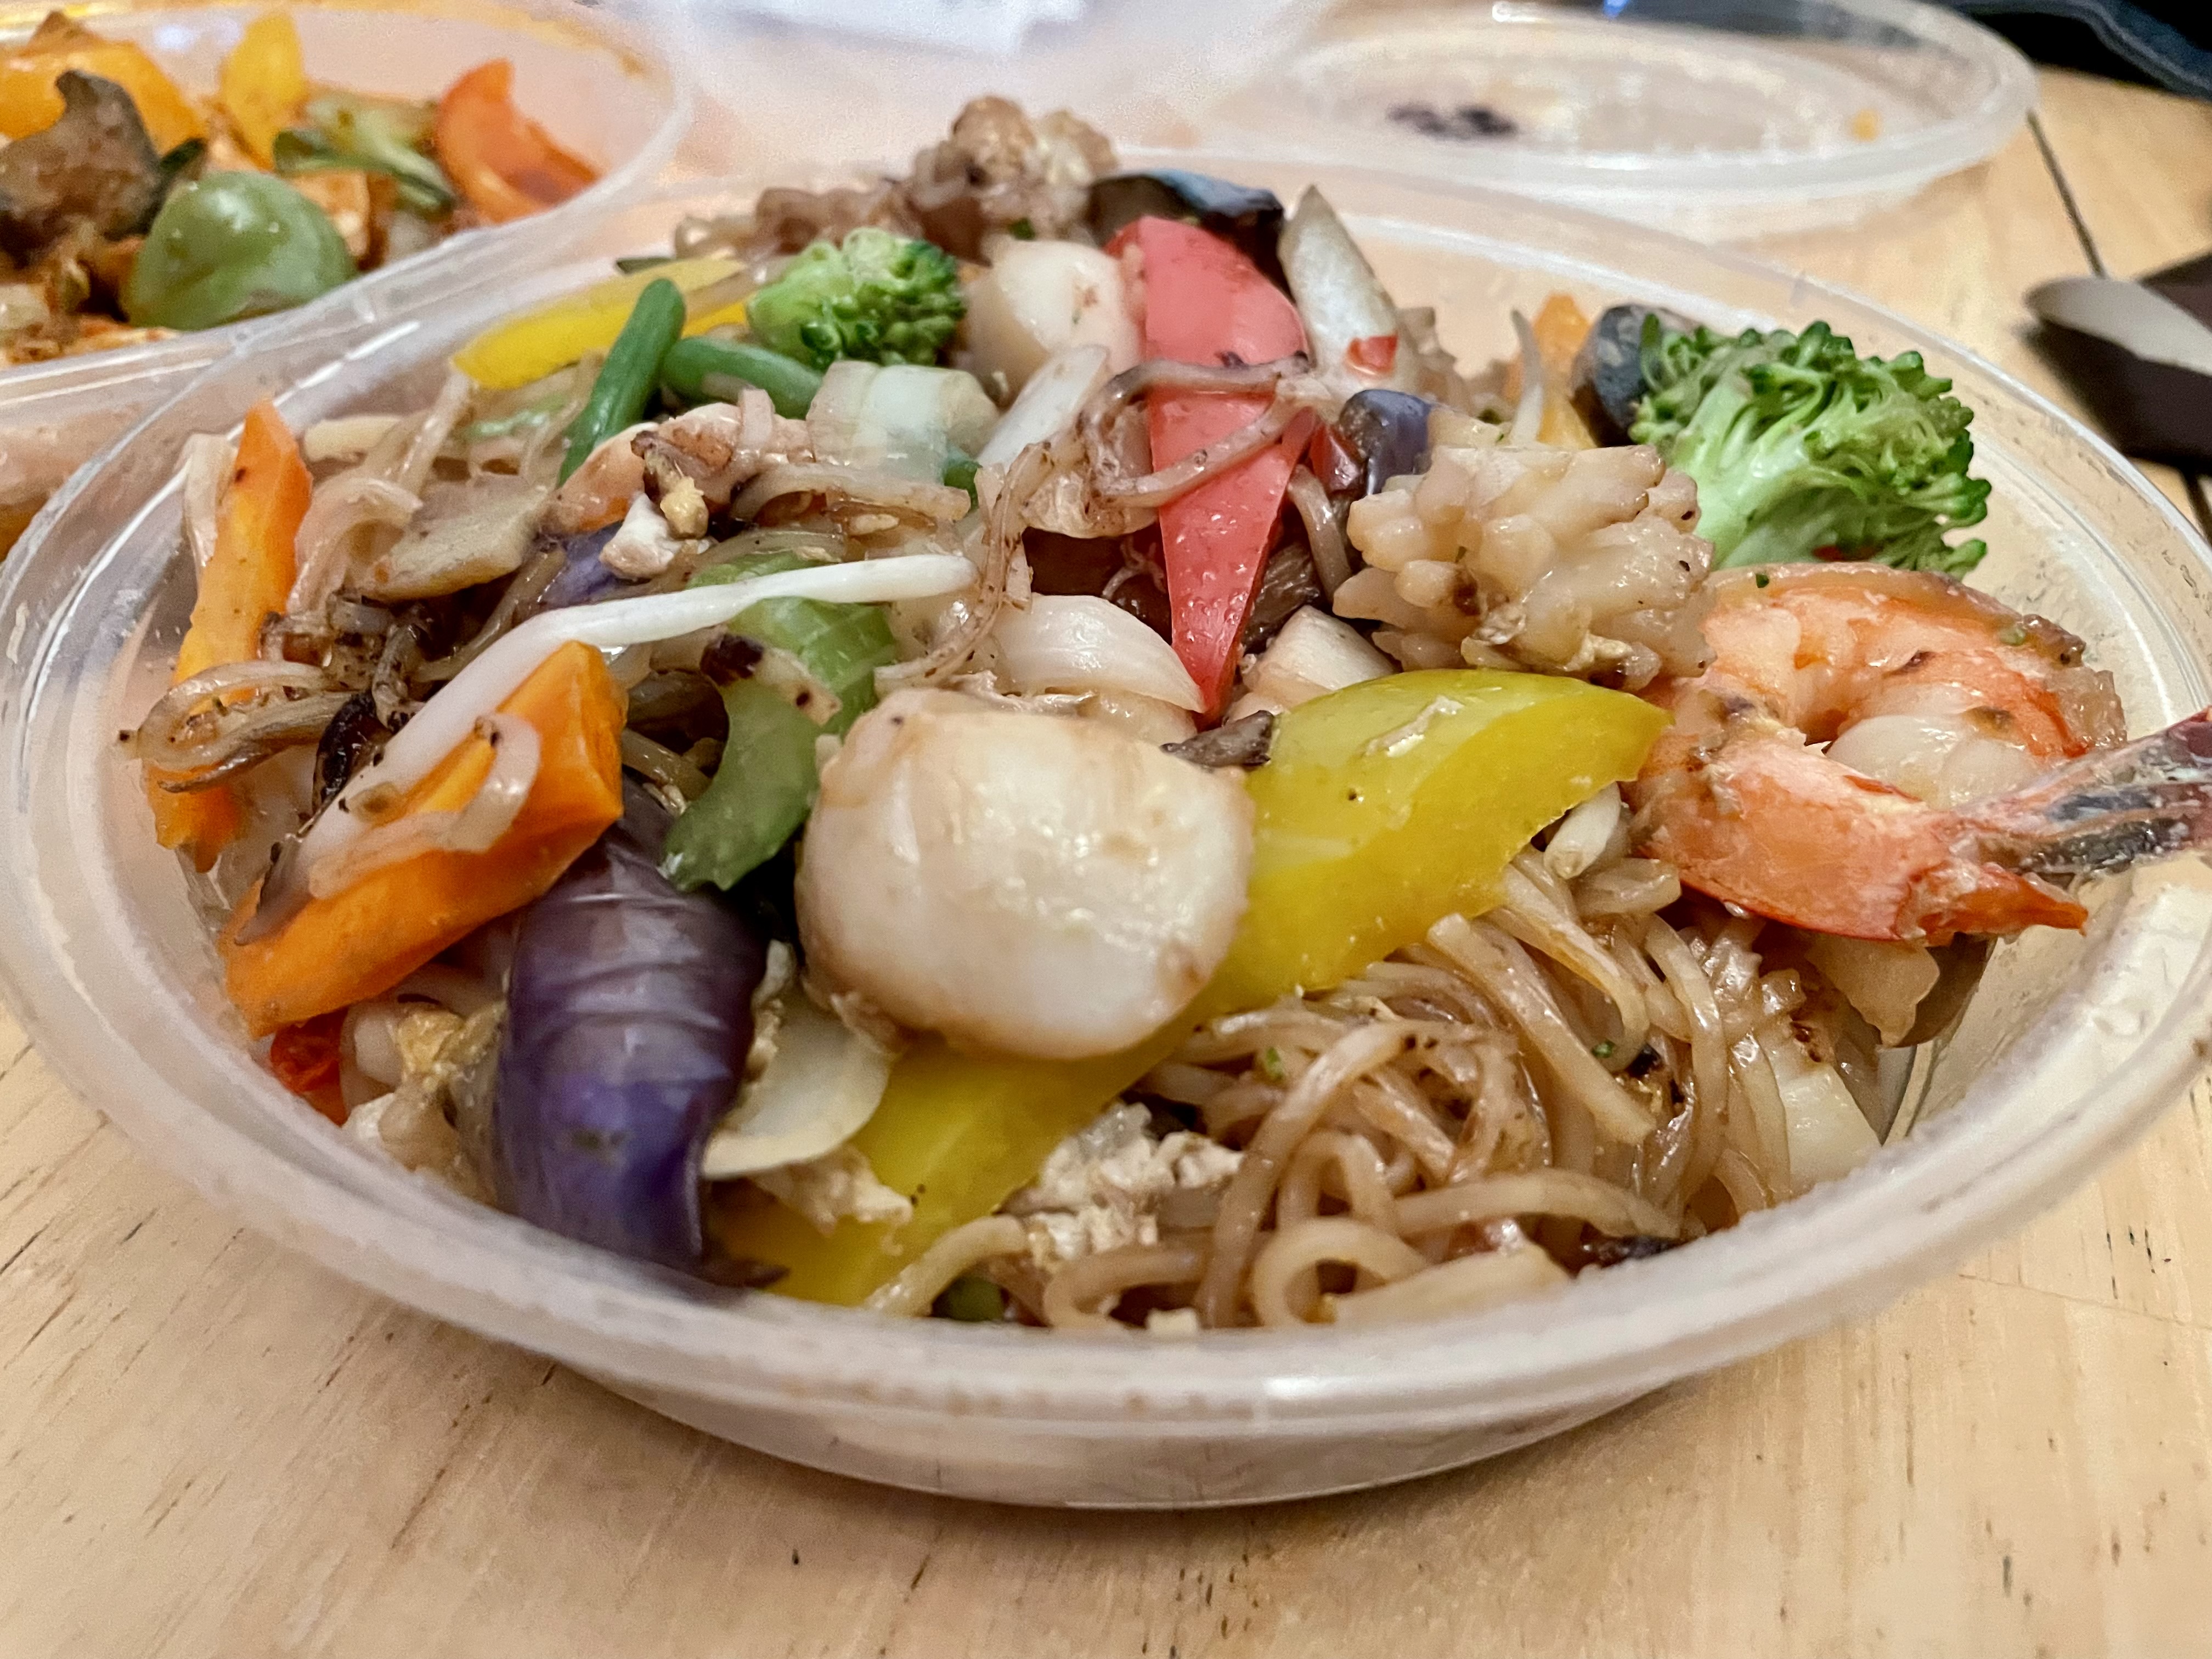 Drunken noodles are typically served with broad rice noodles, but Pookie's variety used a thin substitute which retained the aromatic fragrance and bold flavours of the much-loved dish